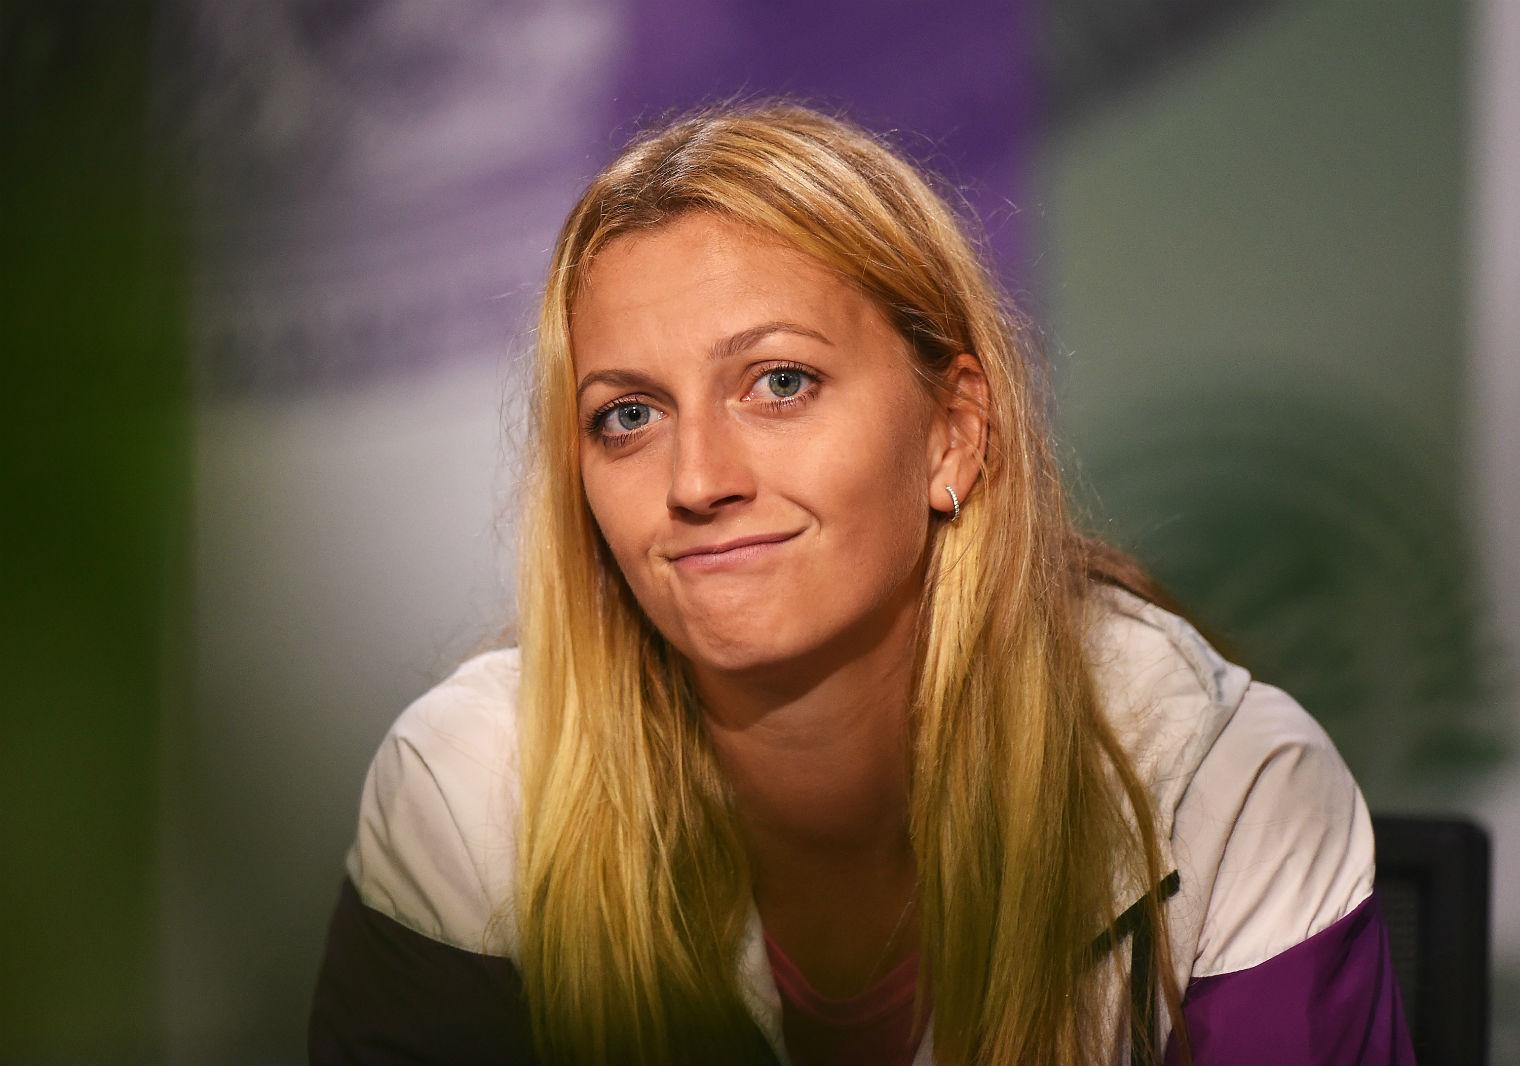 What happened when a journalist asked the Wimbledon champion about ...